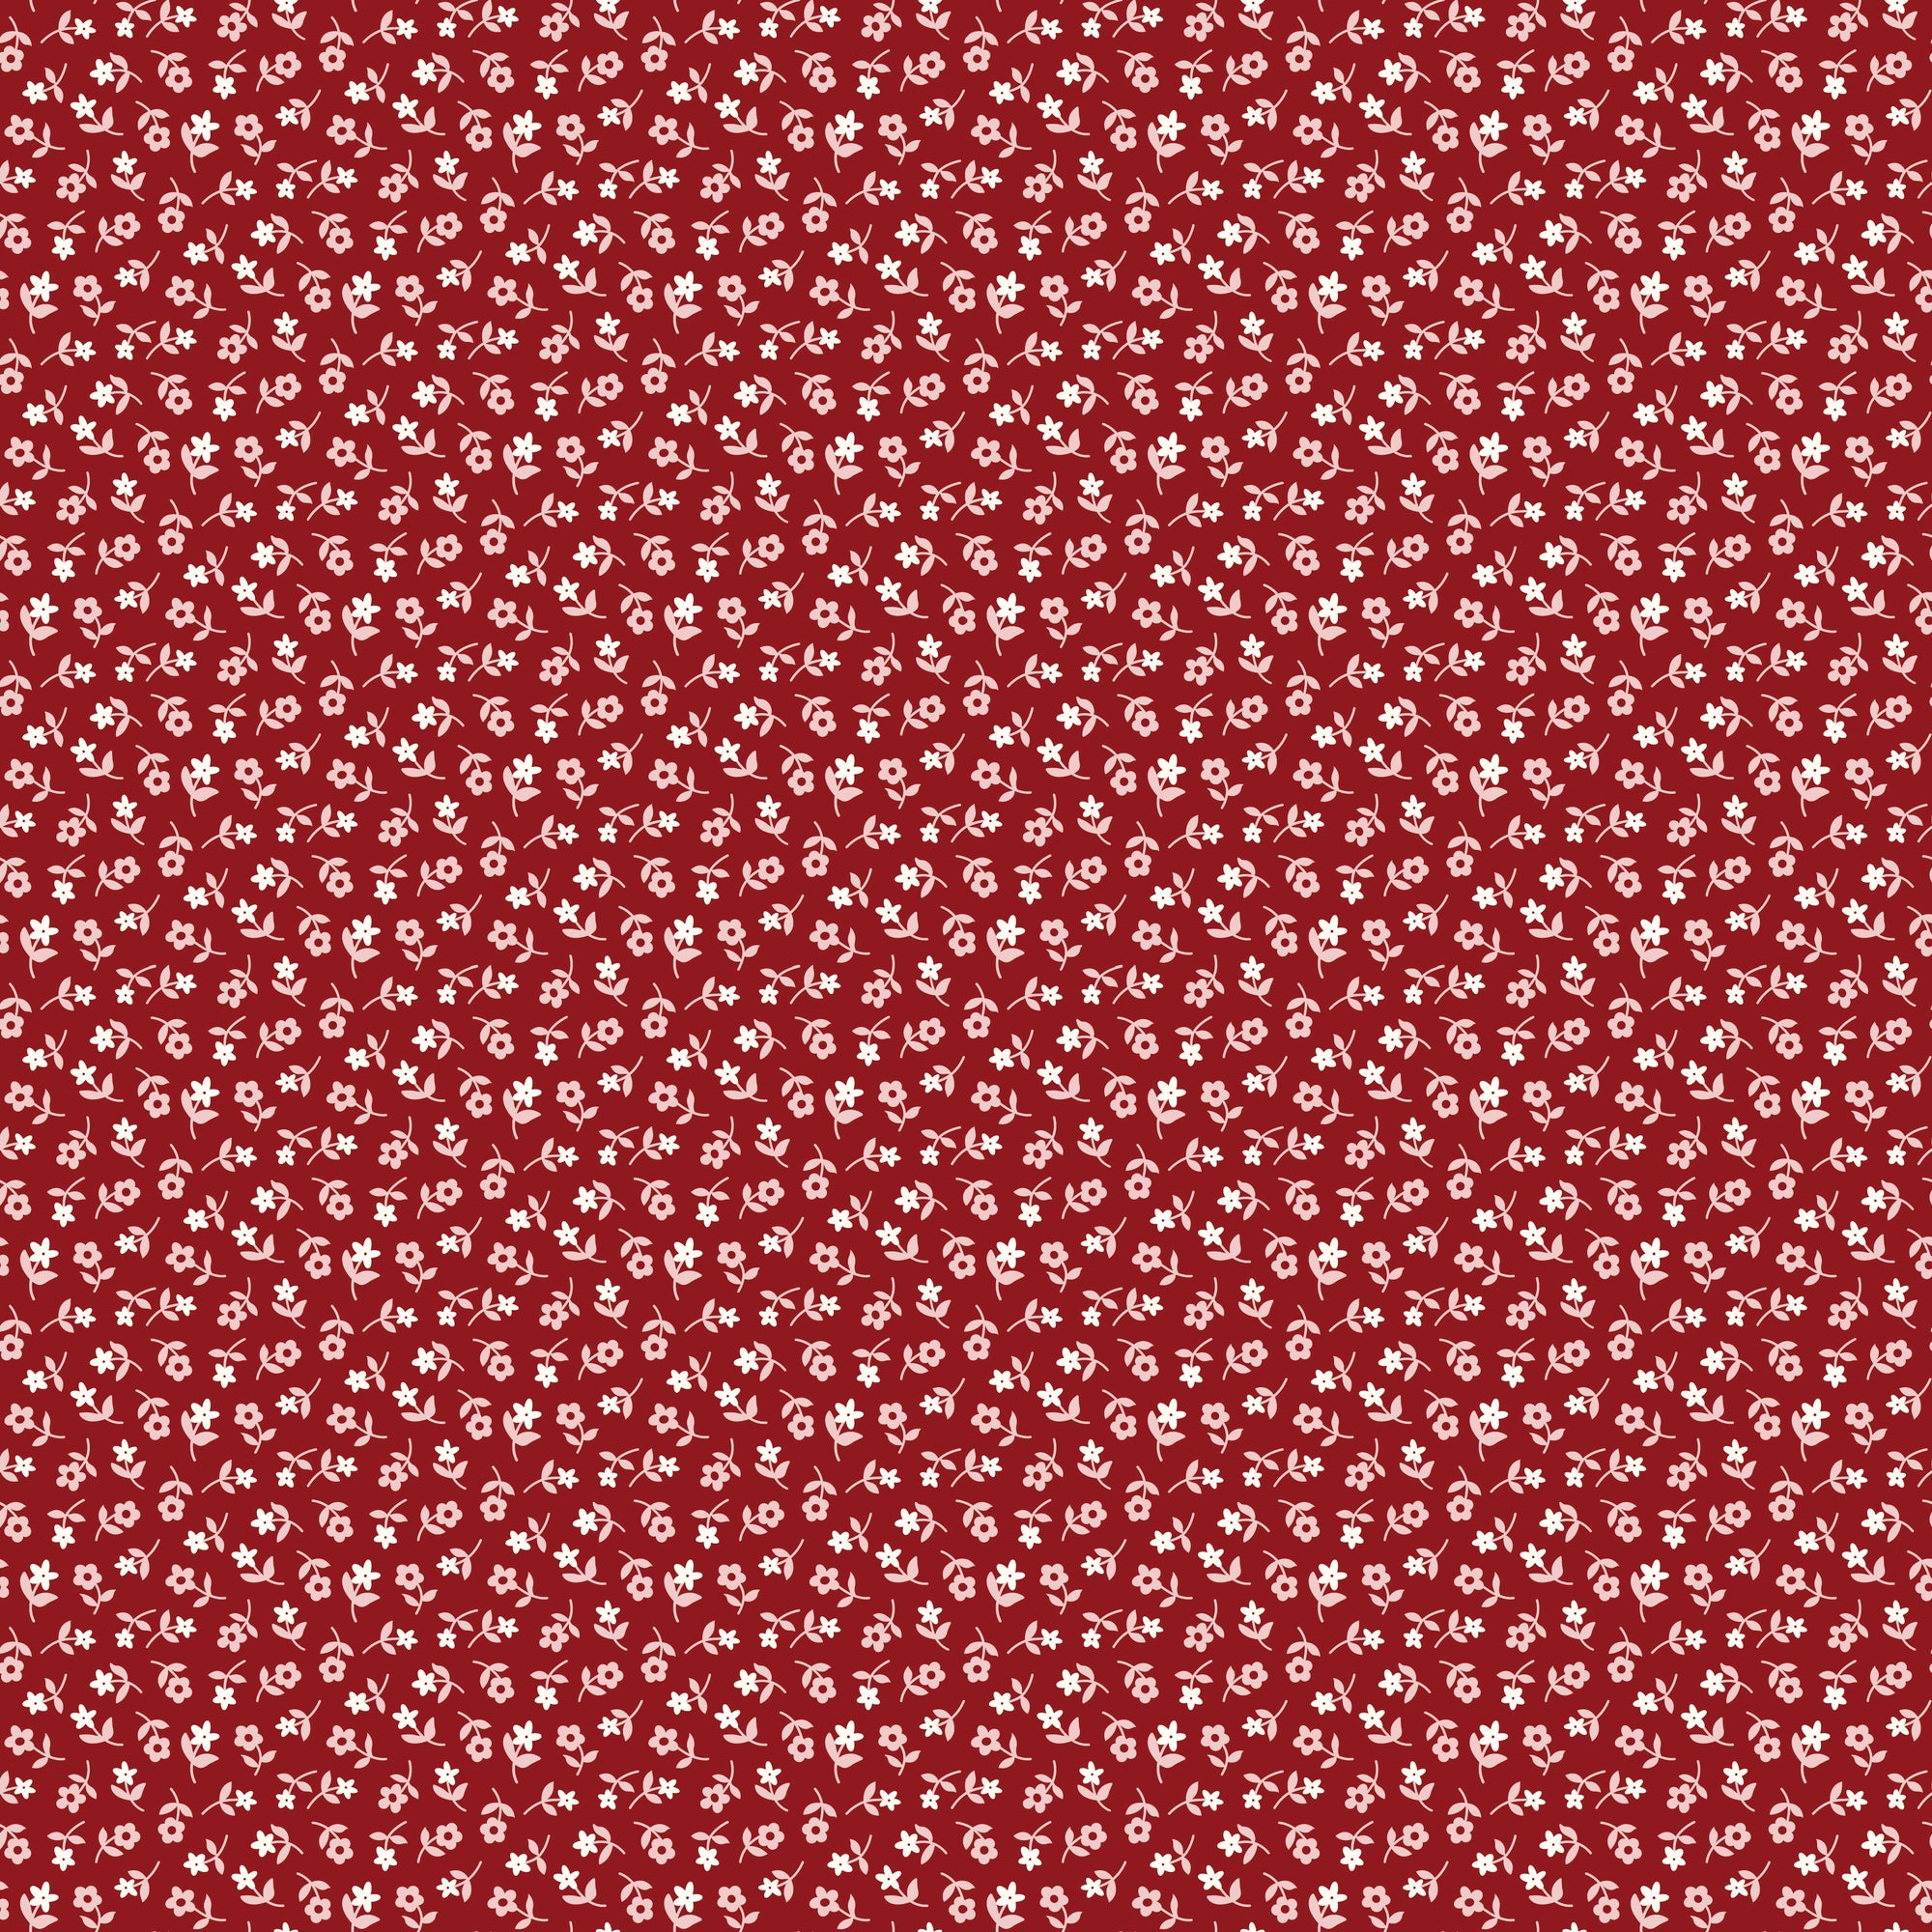 Calico Ditzy - Beet Red - Yardage